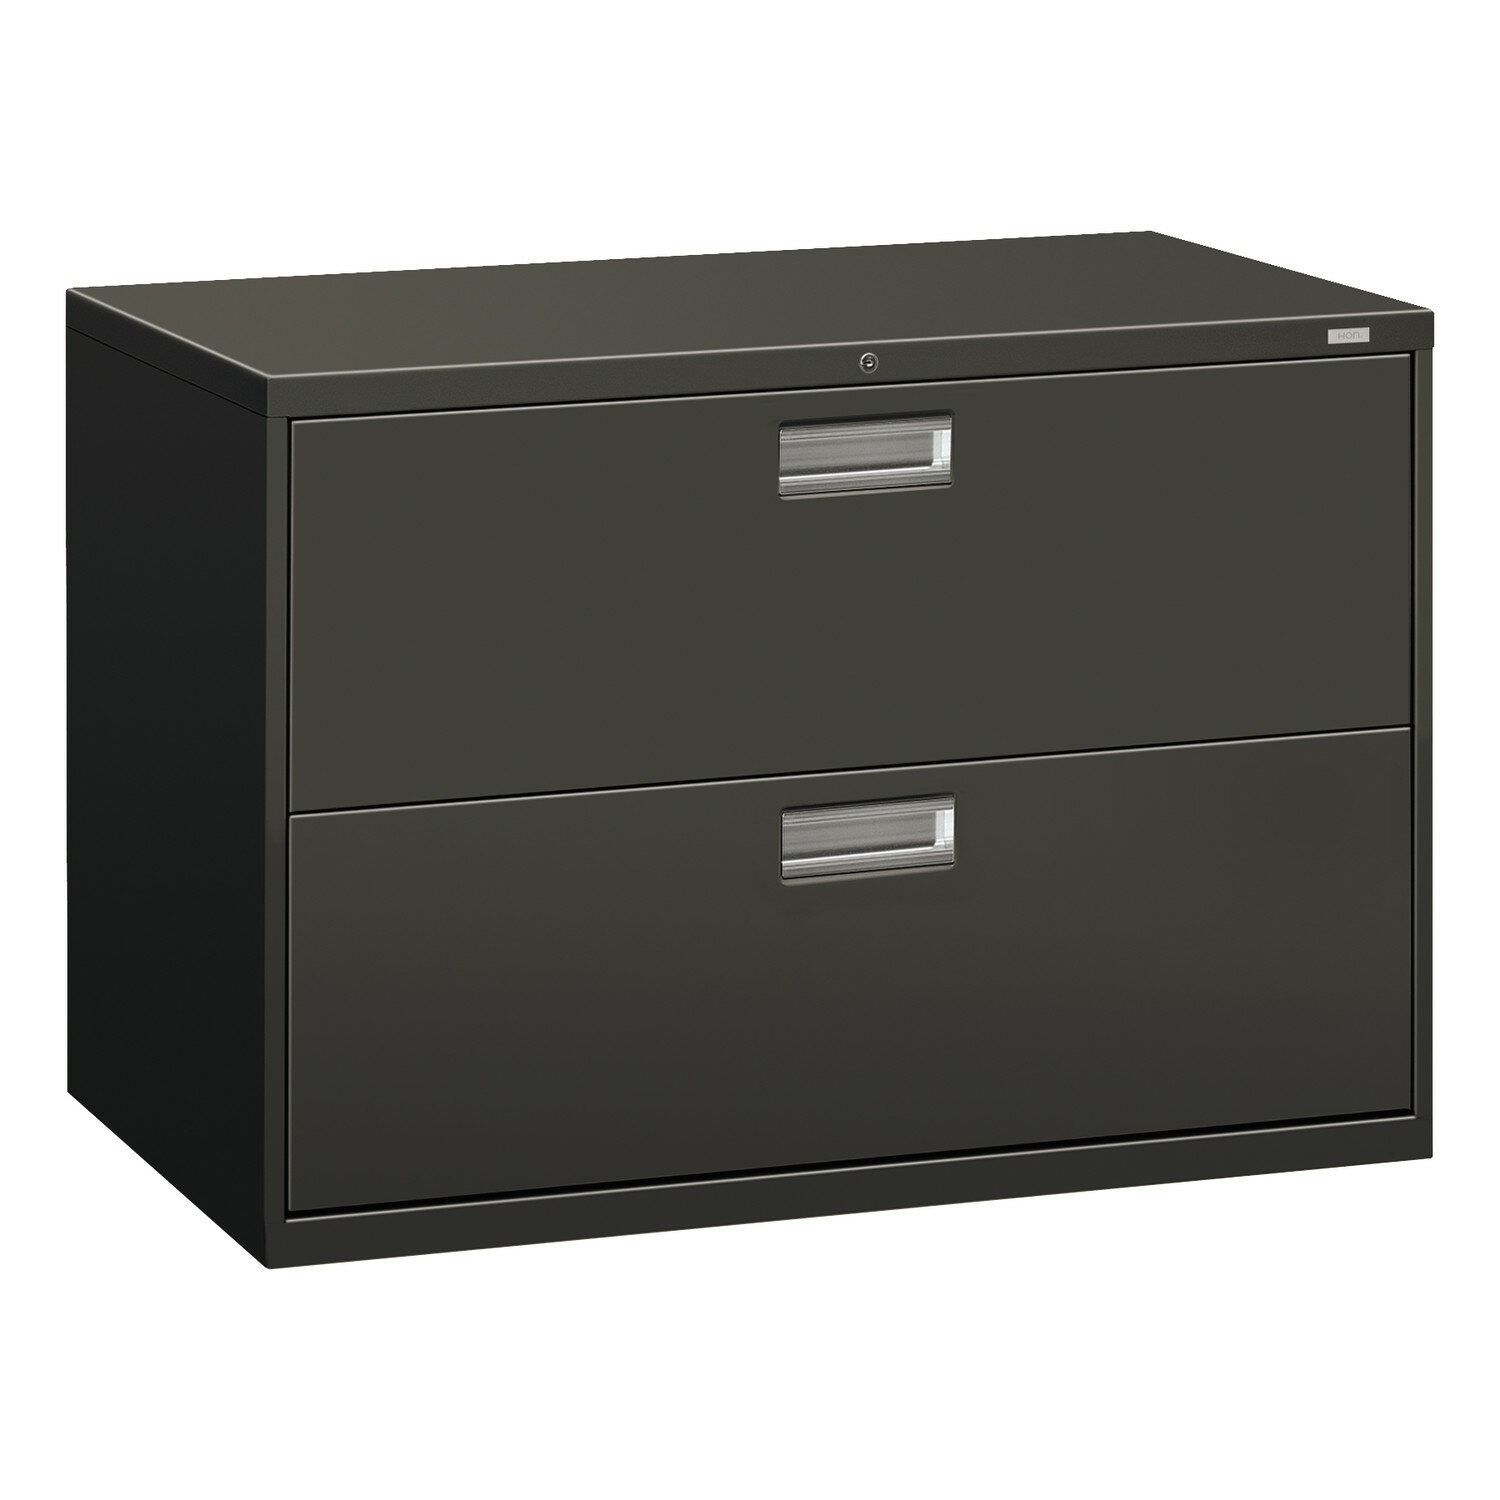 Hon Brigade 600 Series 2 Drawer Lateral Filing Cabinet Wayfair throughout proportions 1500 X 1500